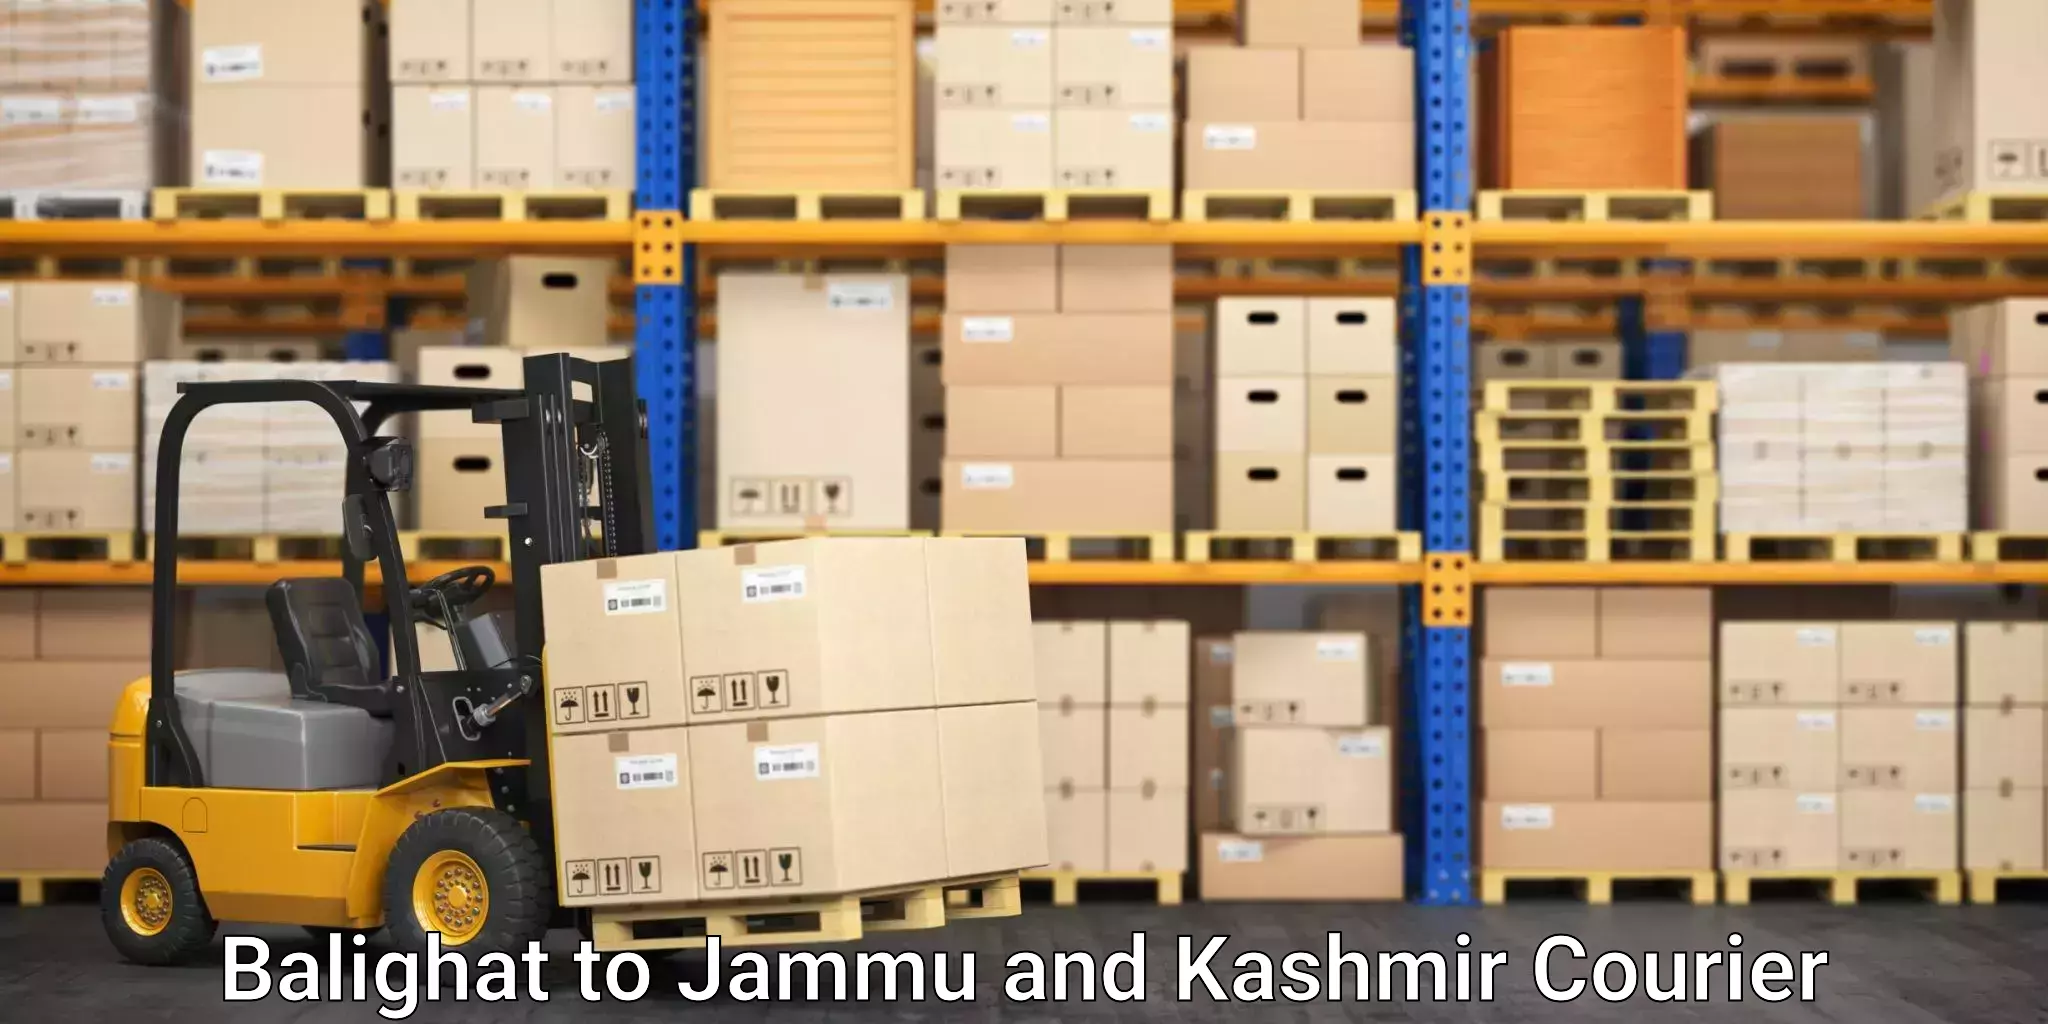 Courier service partnerships in Balighat to Baramulla